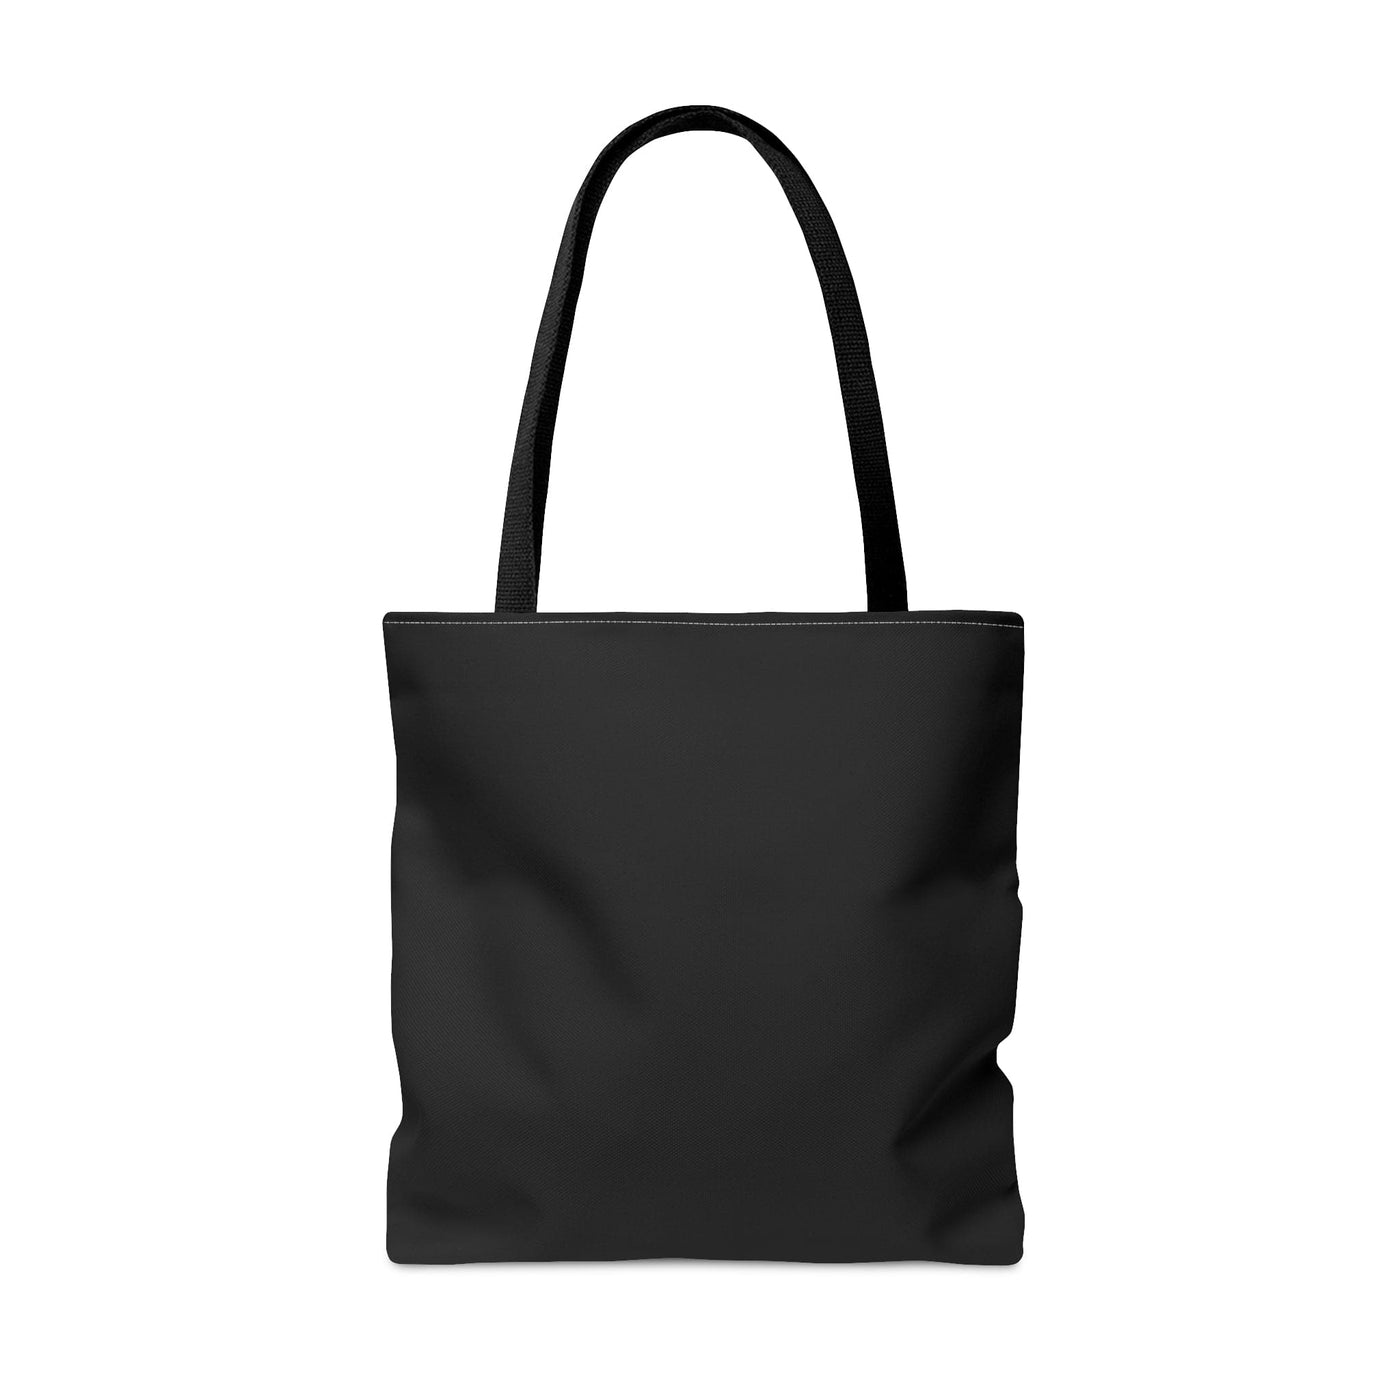 Canvas Tote Bag Awesome By Design White Print - Bags